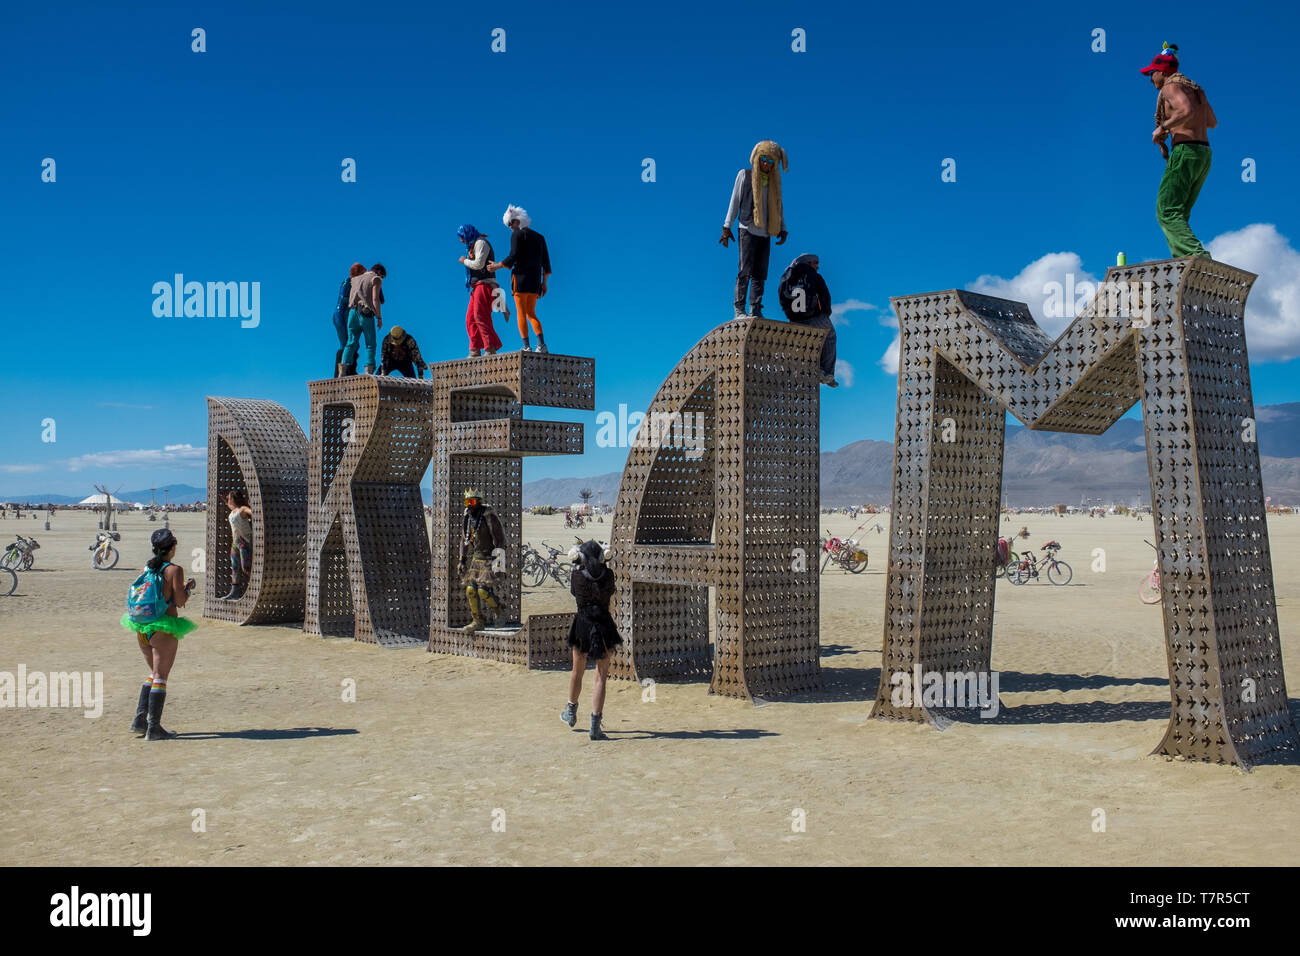 Burning Man, Nevada, USA, September, 6, 2015: Attendees at Burning Man festival standing on and around an artwork of letters that spell out the word, DREAM, against a bright blue sky.gg Stock Photo